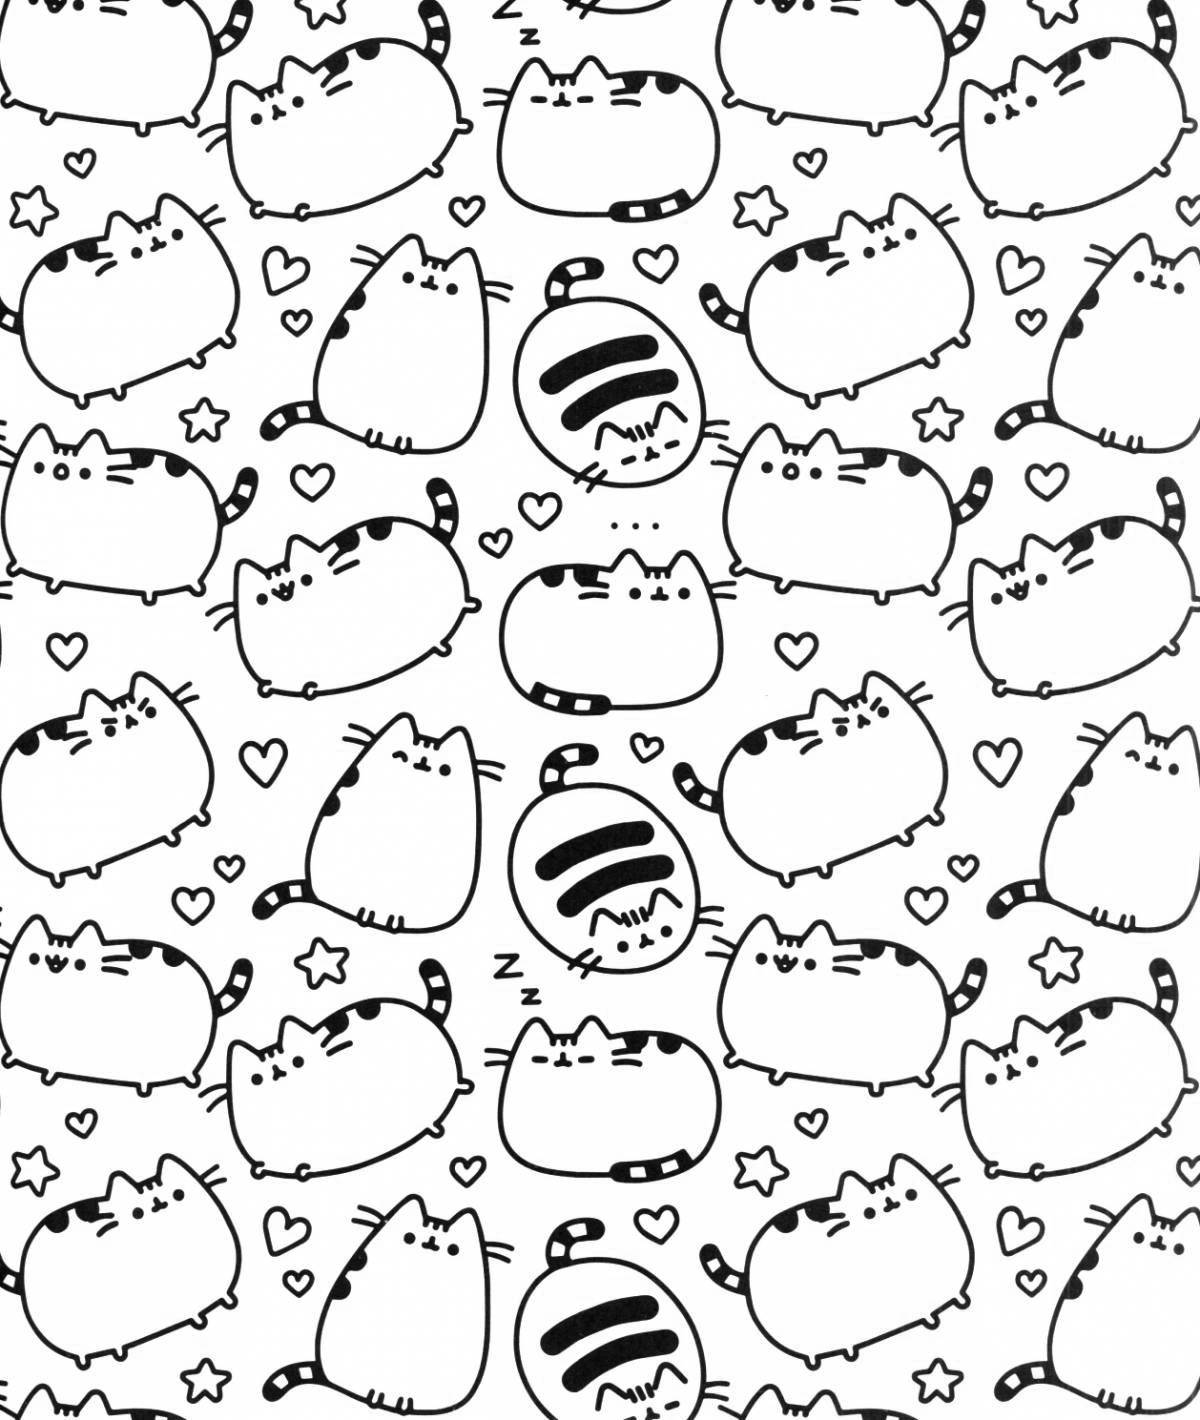 Amazing stickers pusheen coloring book